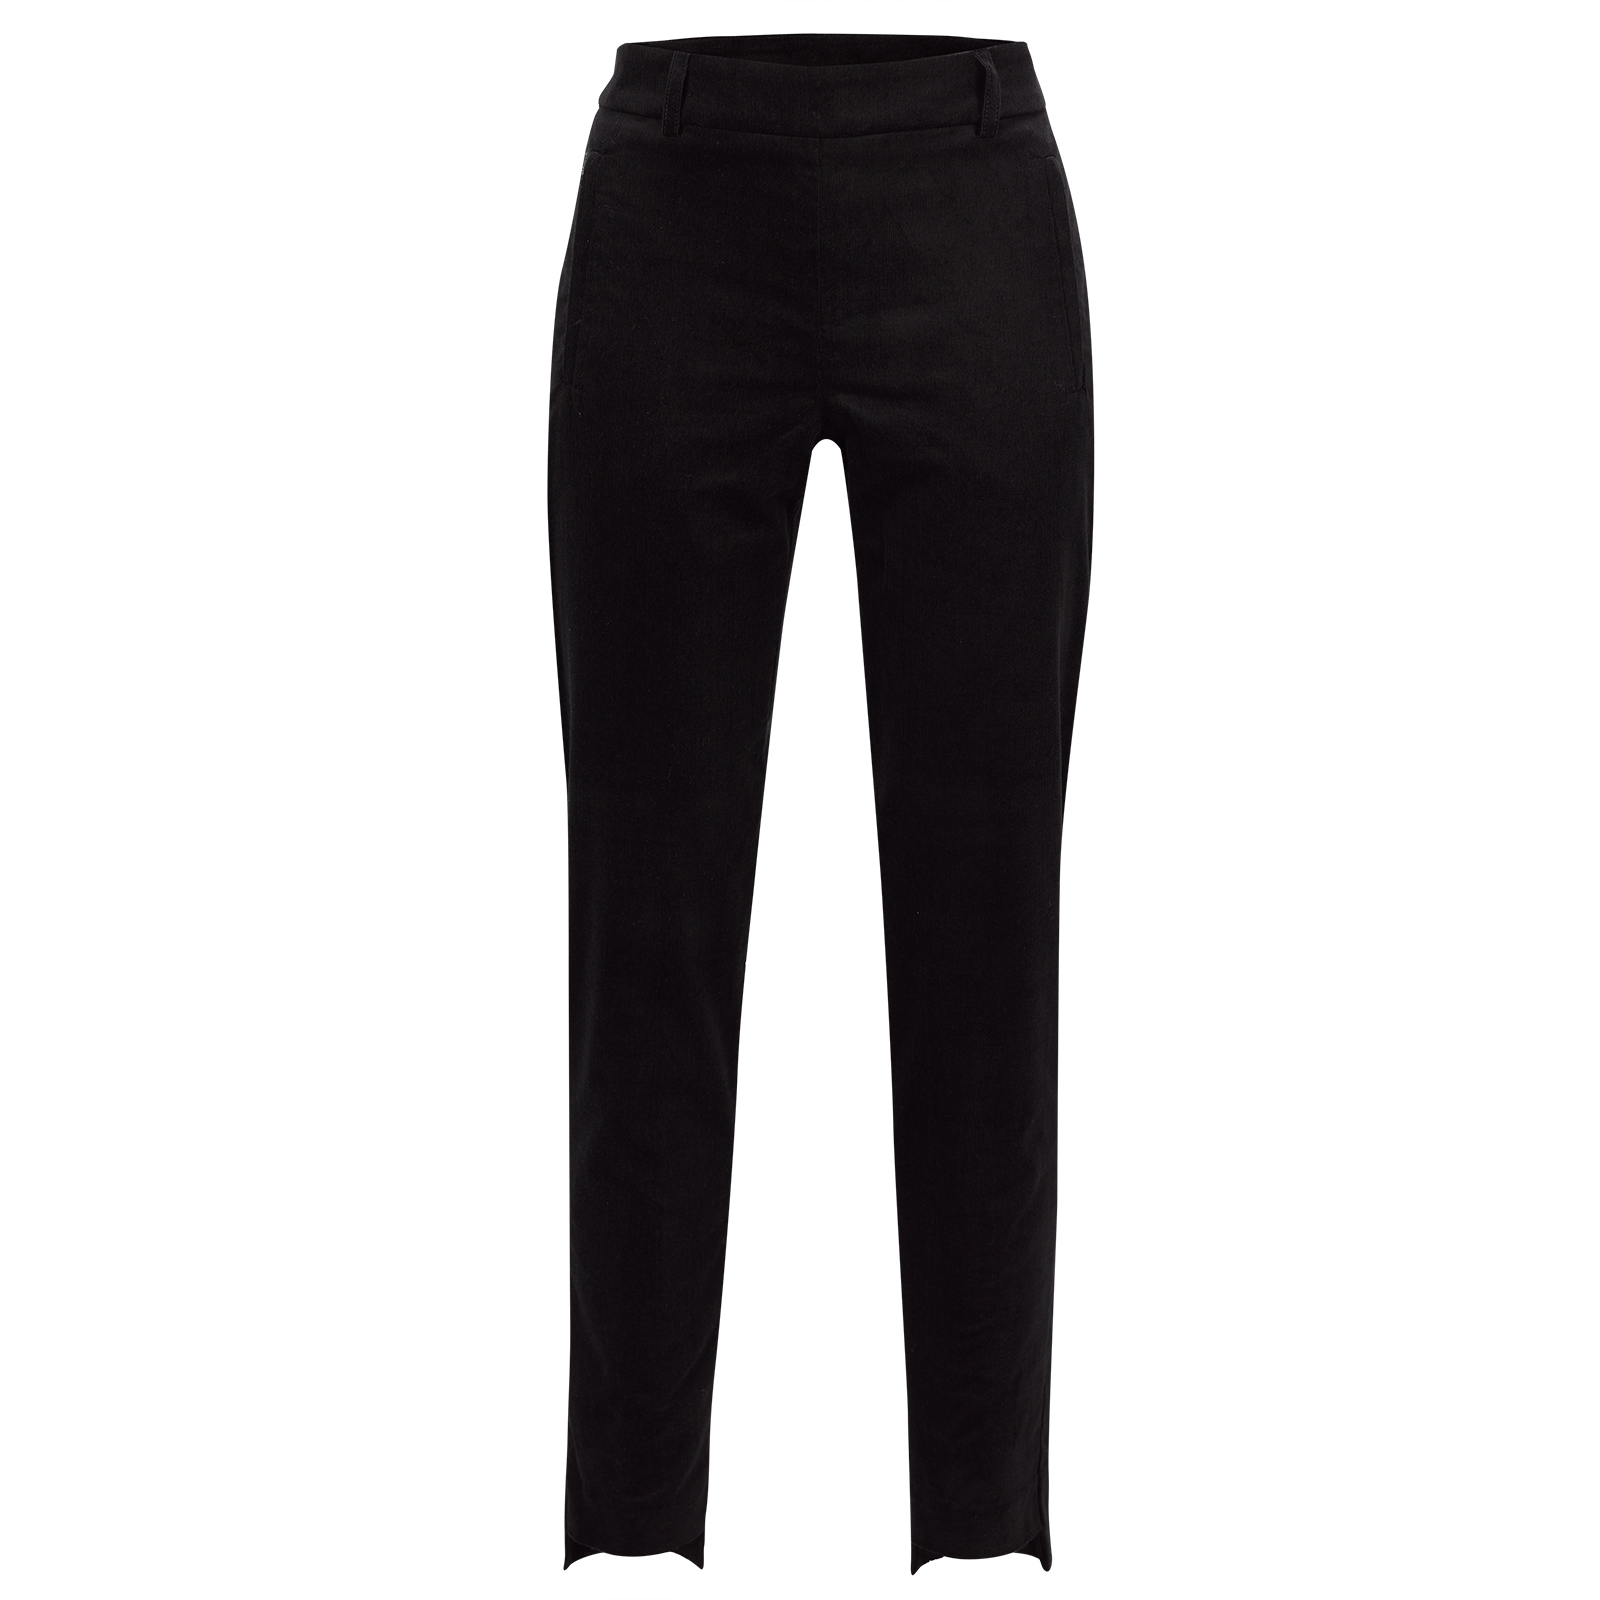 7/8 length ladies' stretch golf trousers from extra skin friendly soft corduroy